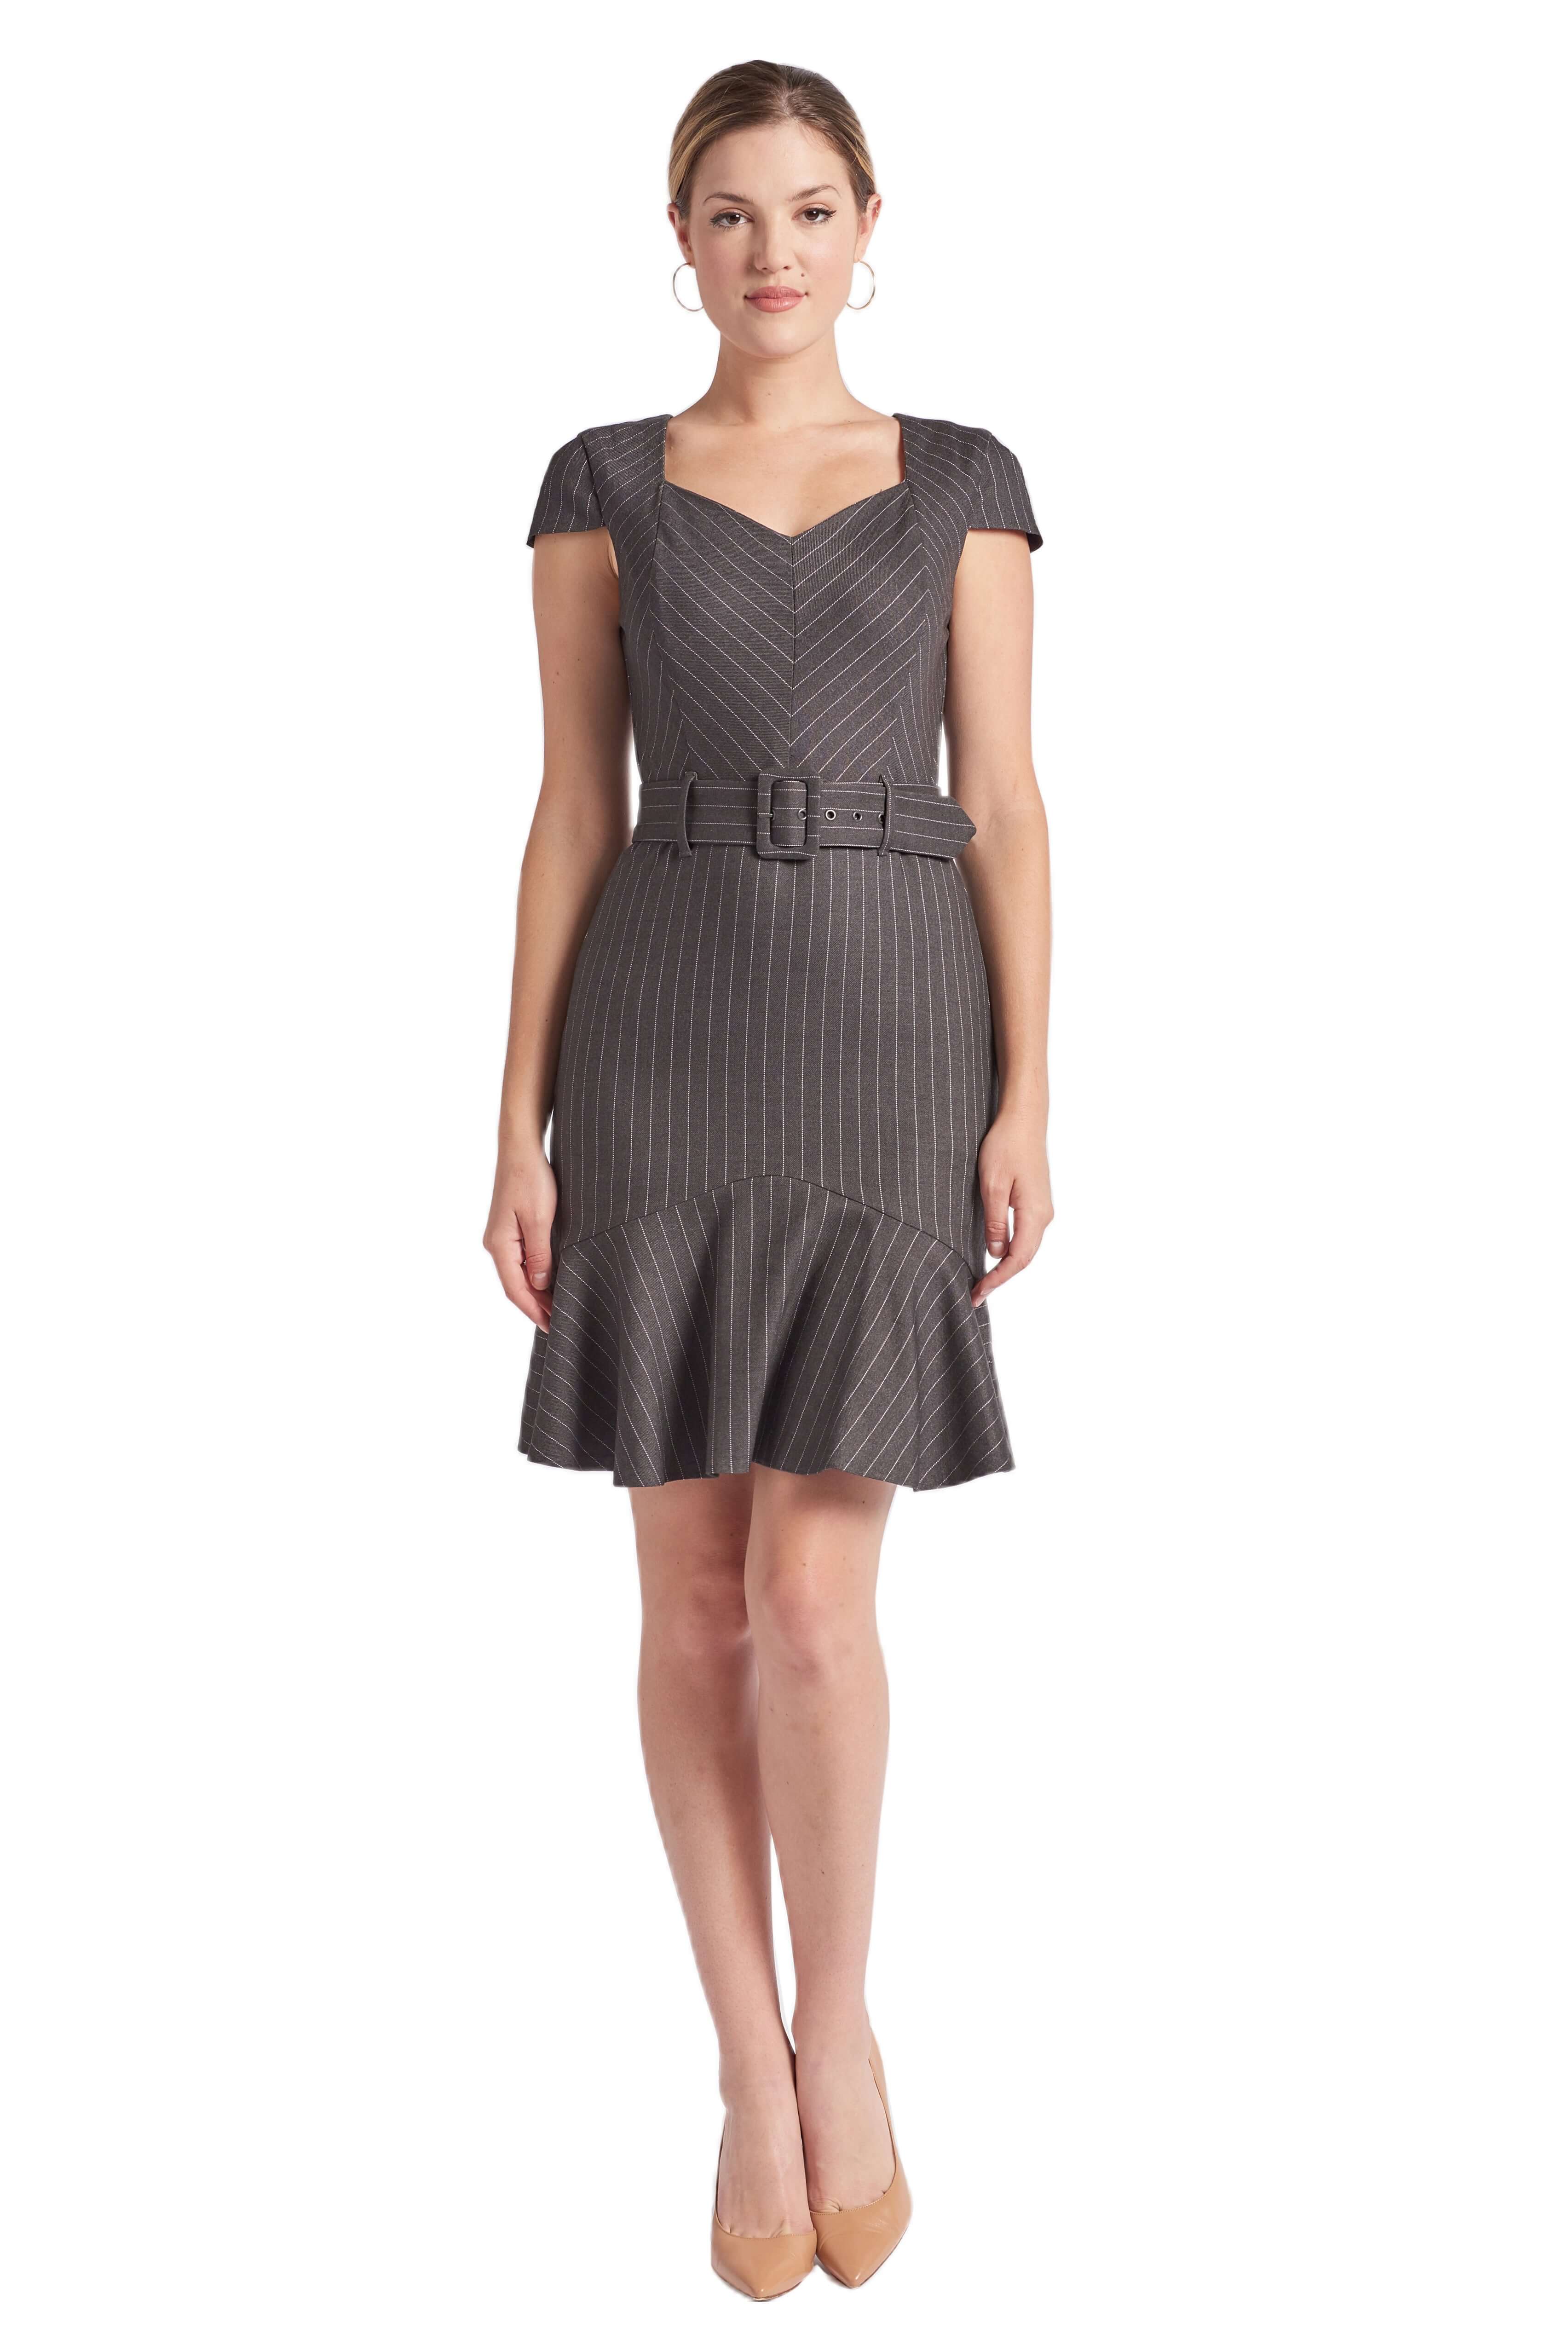 Model wearing charcoal pinstripe above the knee dress with cap sleeves, self belt and ruffle hem.